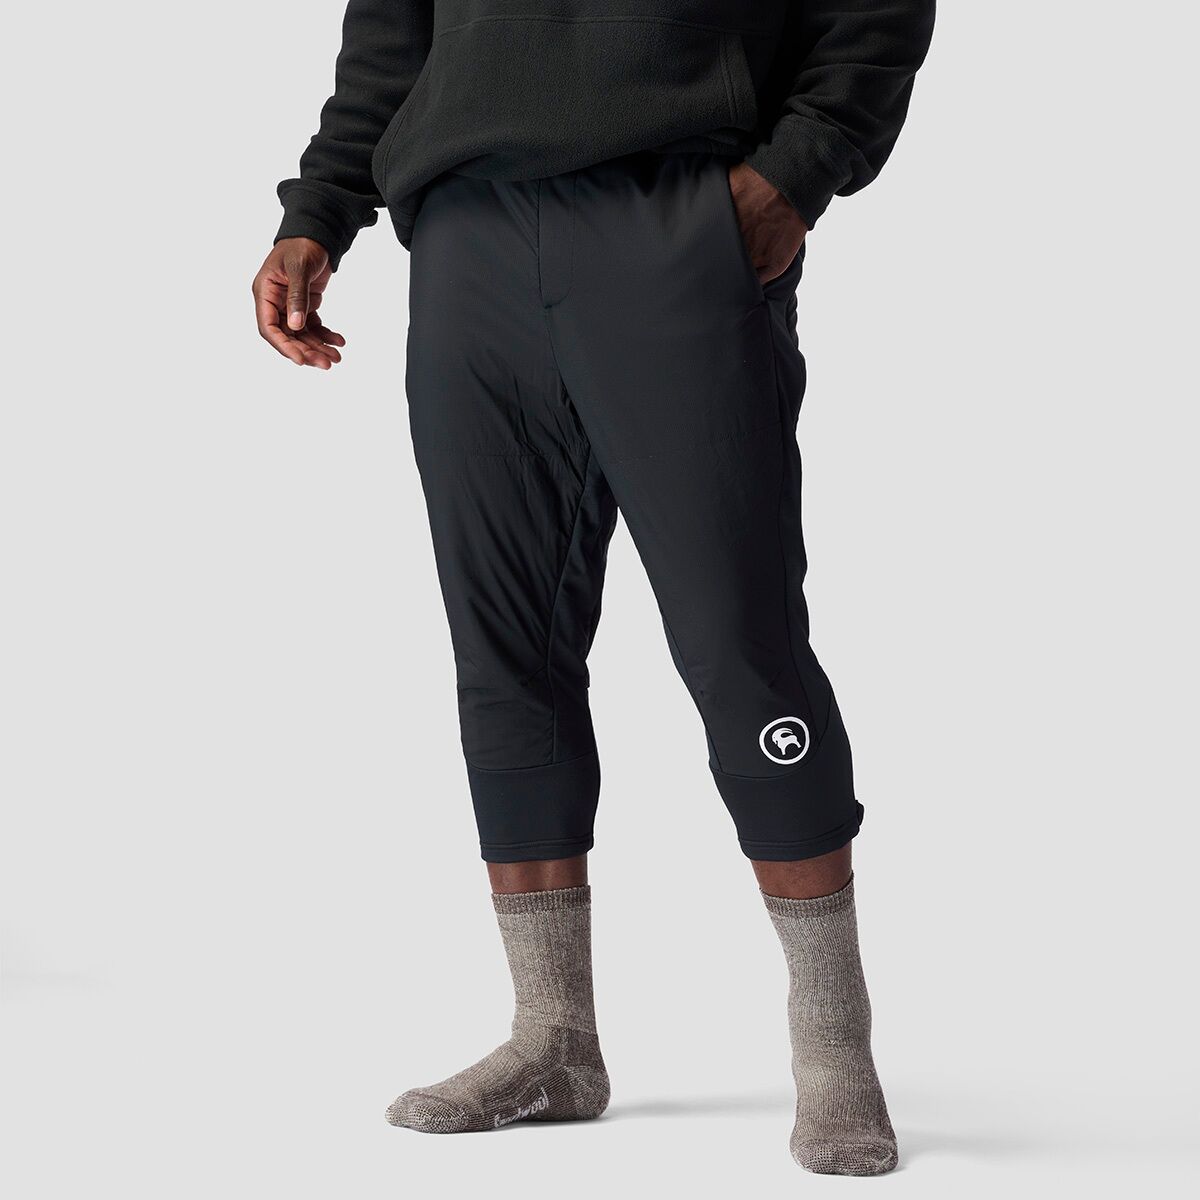 Wolverine Cirque Insulated Pant - Men